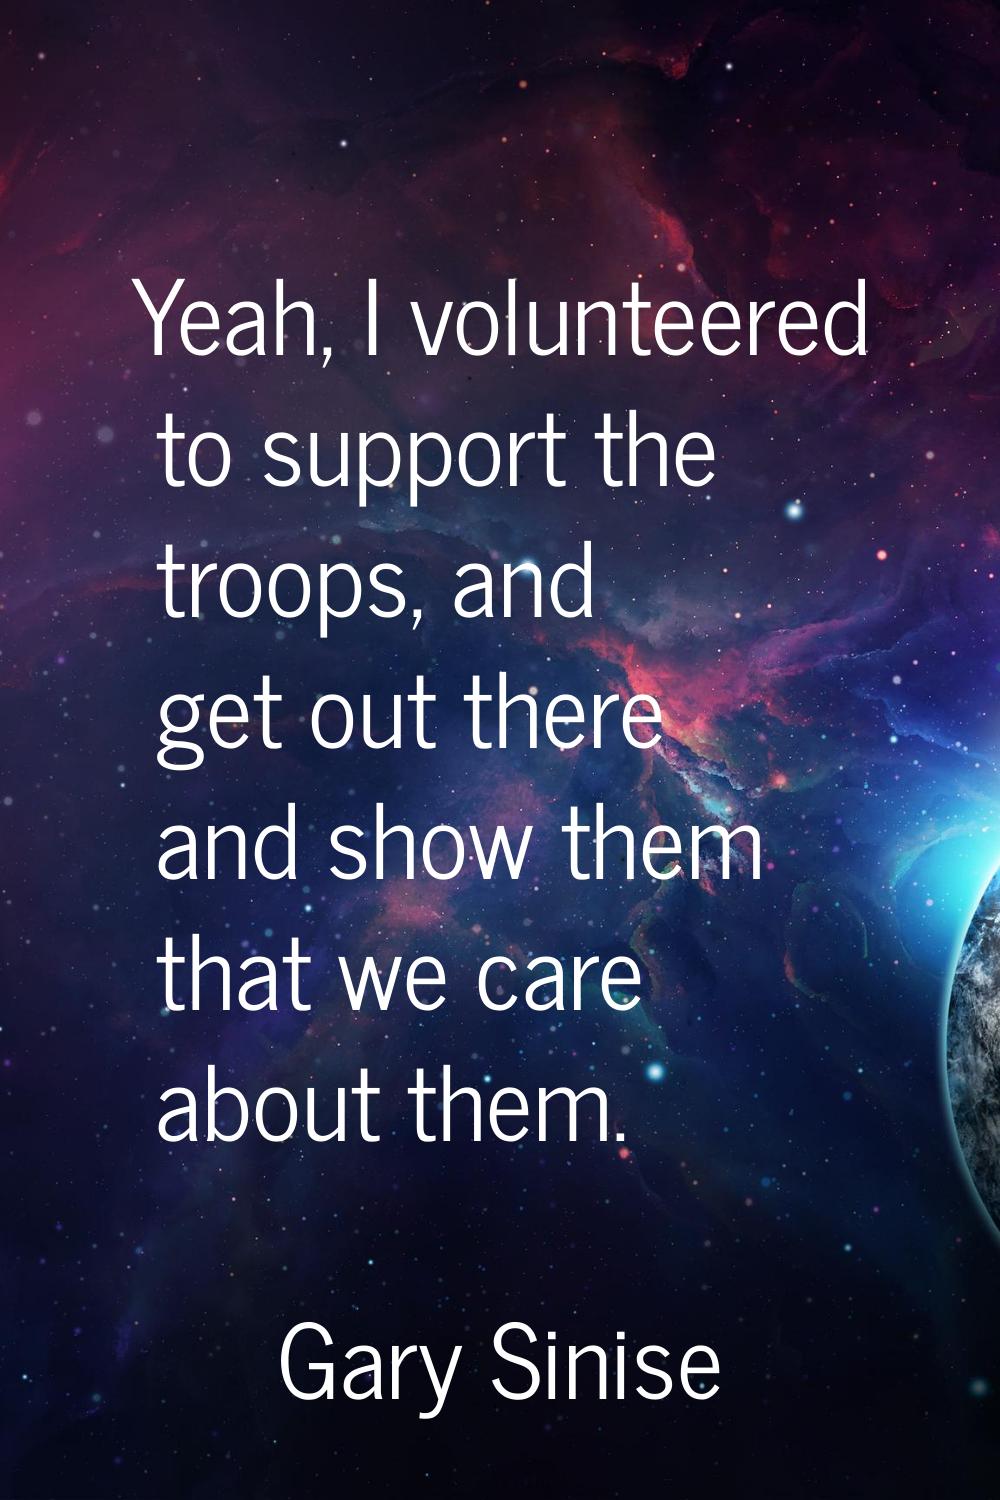 Yeah, I volunteered to support the troops, and get out there and show them that we care about them.